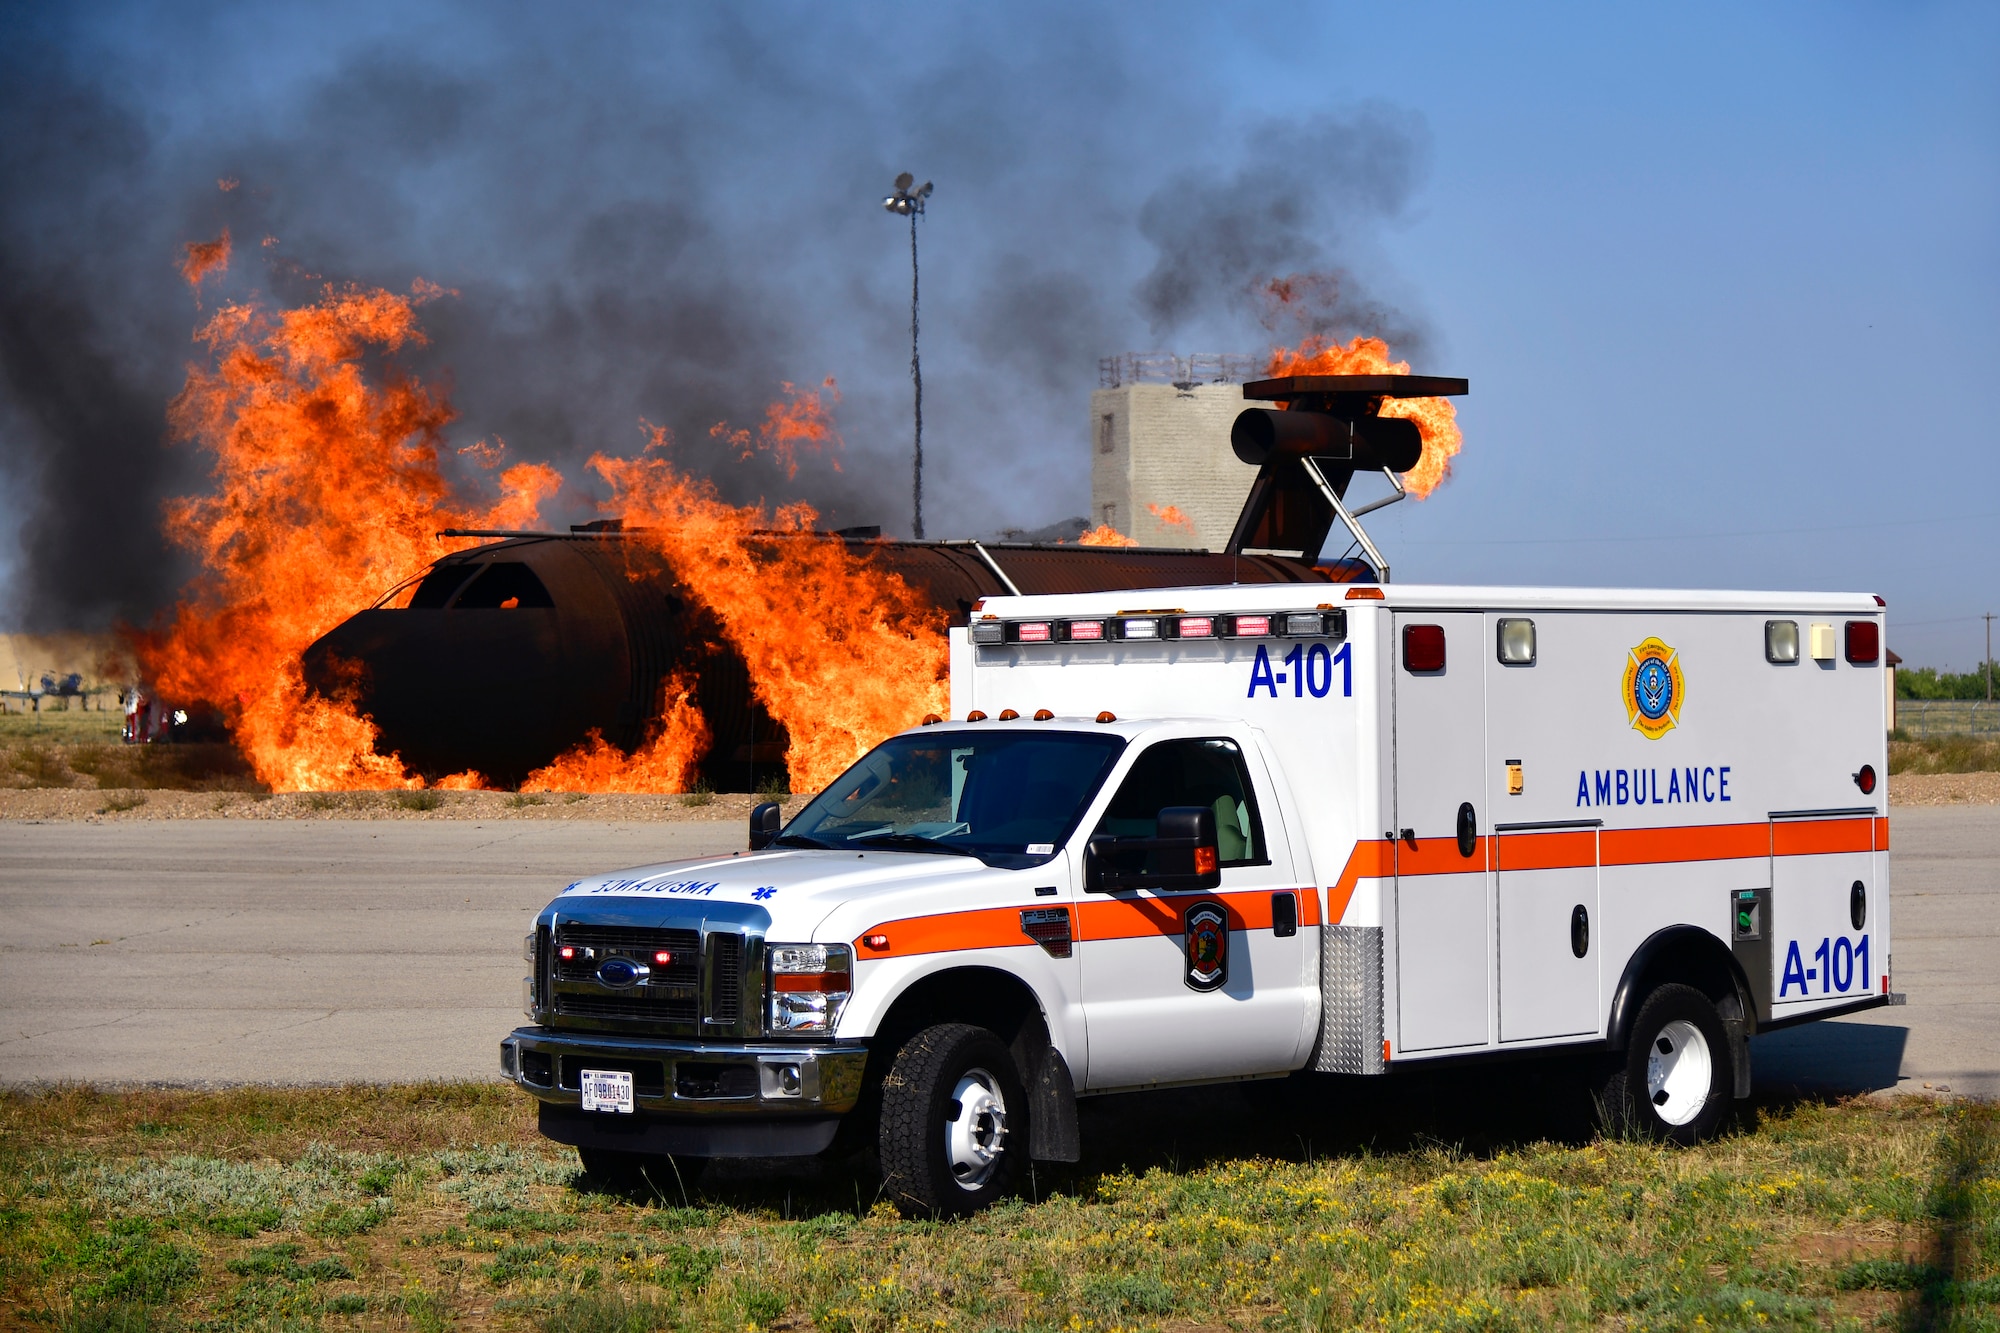 An ambulance parked while an aircraft fire training simulator is ablaze in the background.